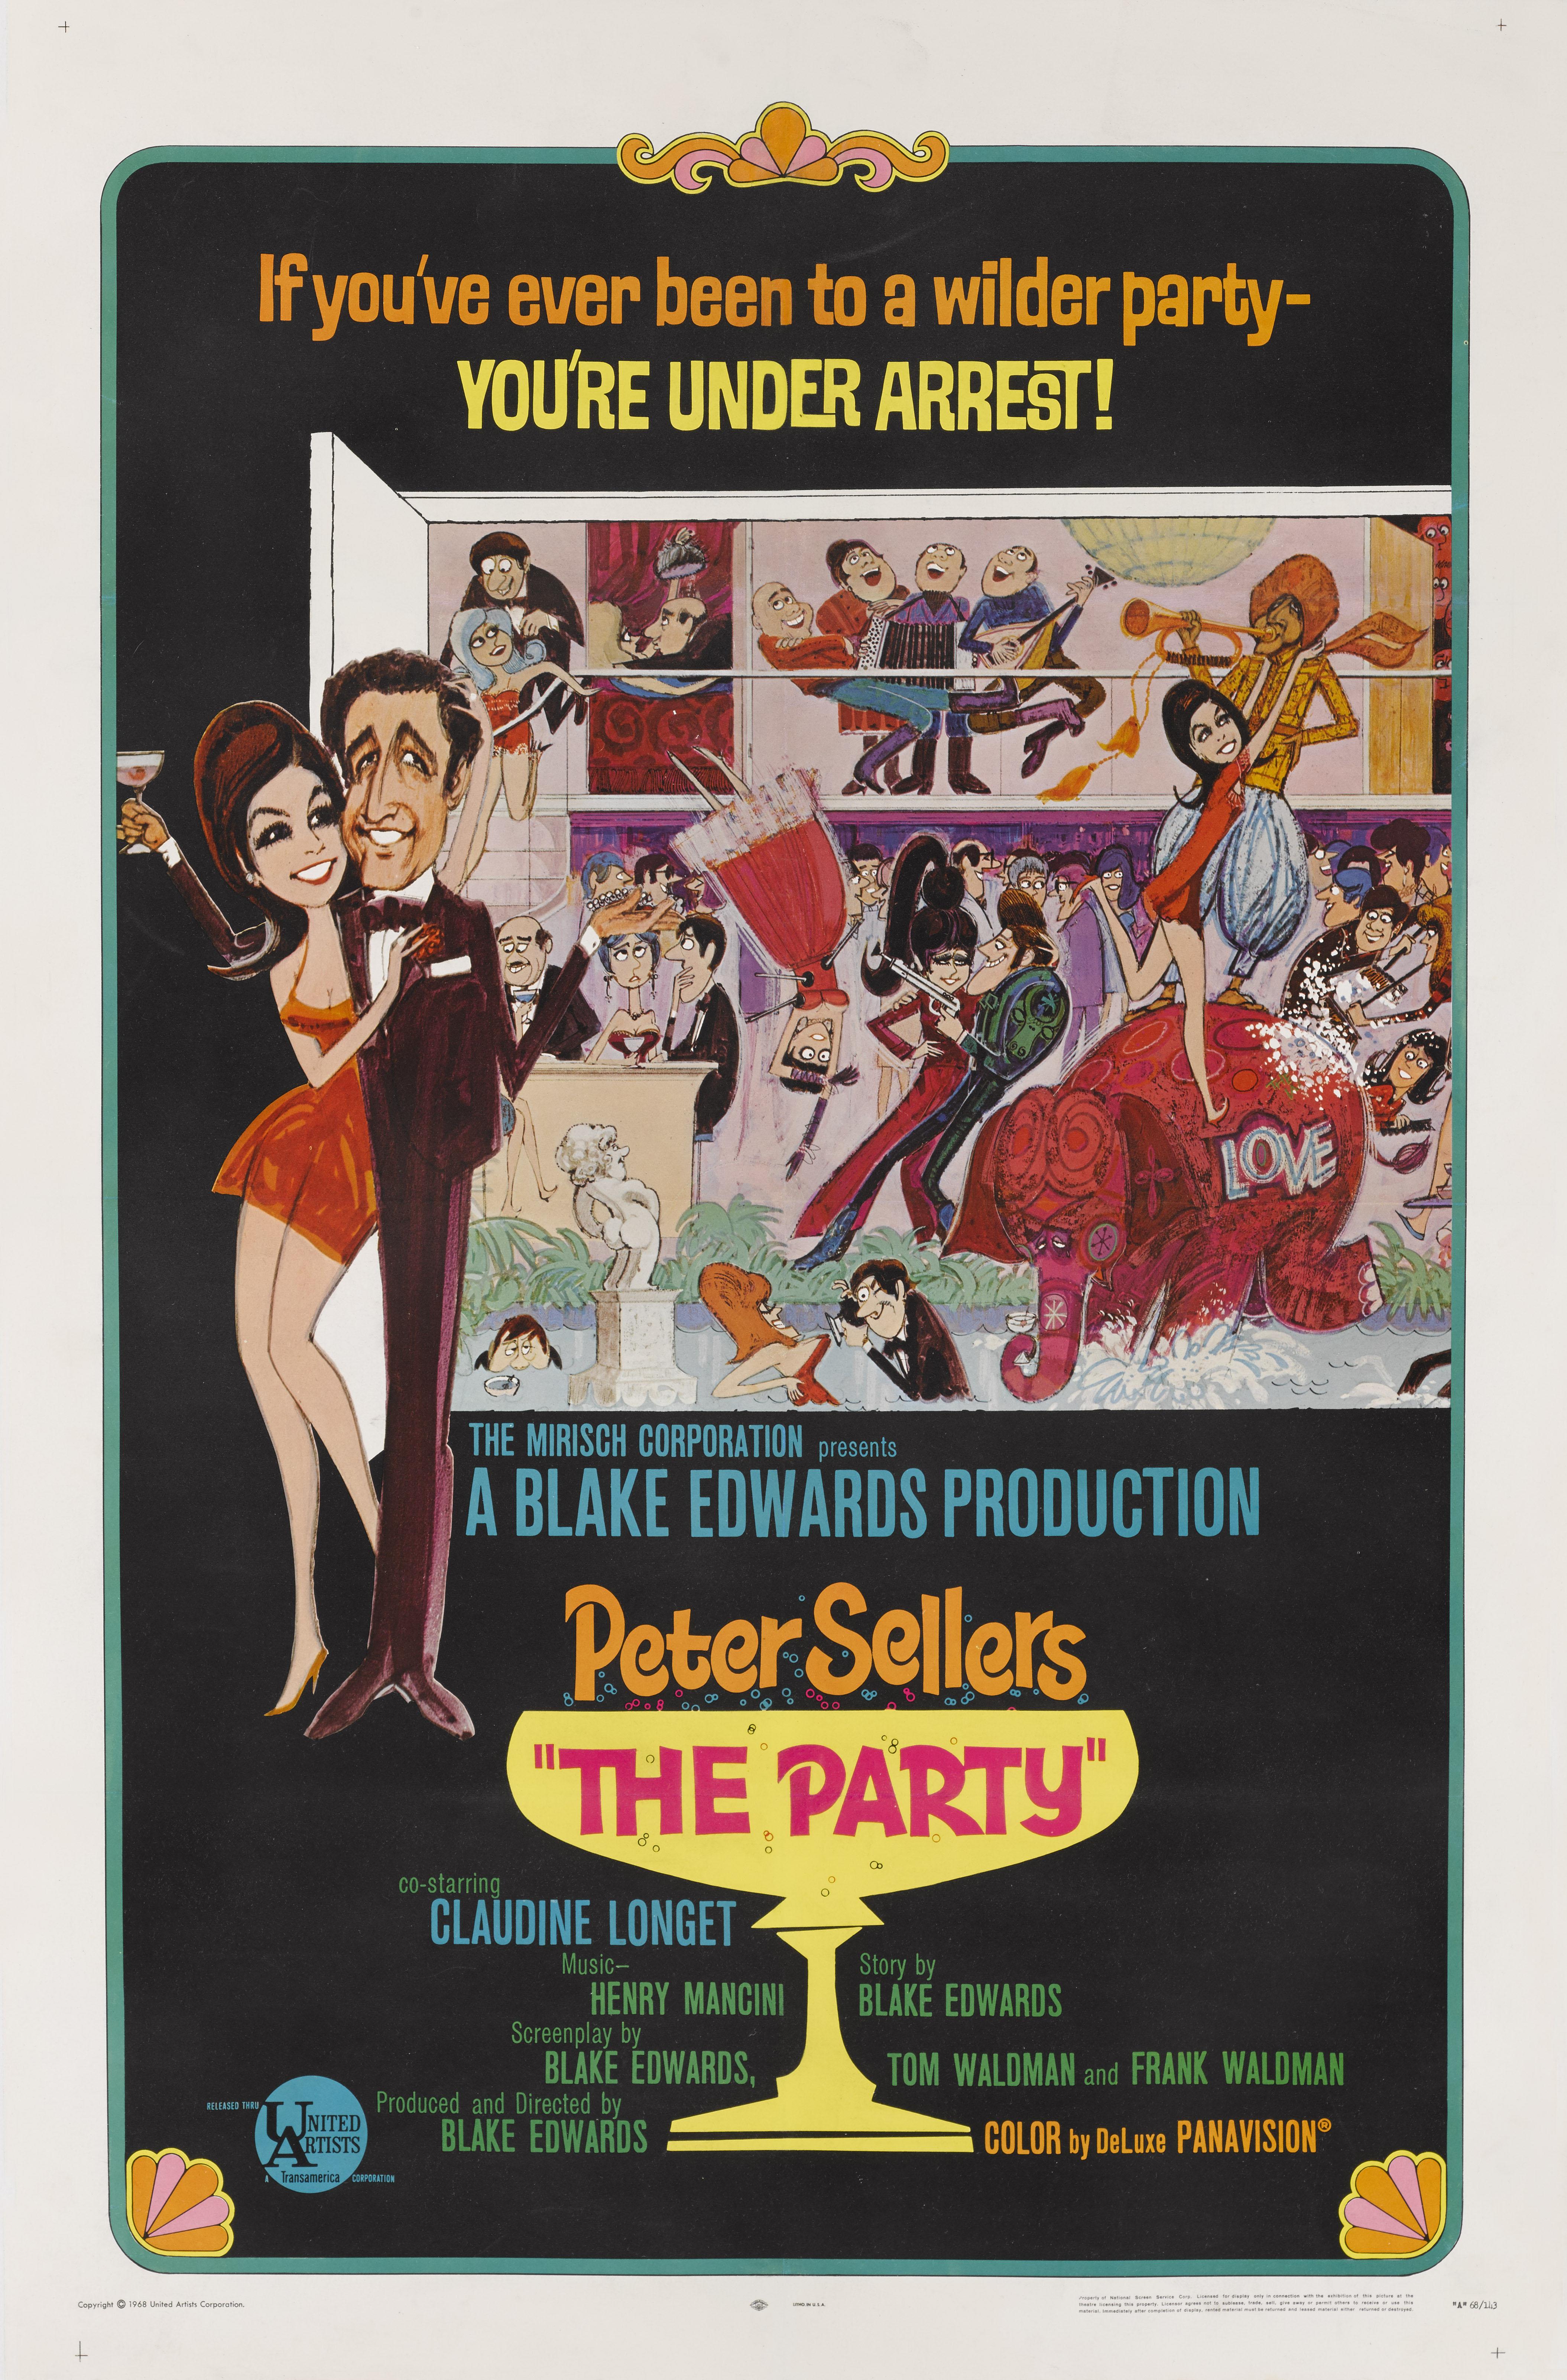 Original 1968 style a US film poster. The artwork is by Jack Davis (1924-2016)
Two different US one sheets were printed for this film. This style a design is by far the rarer of the two
The party is built around the classic premise of the fish out